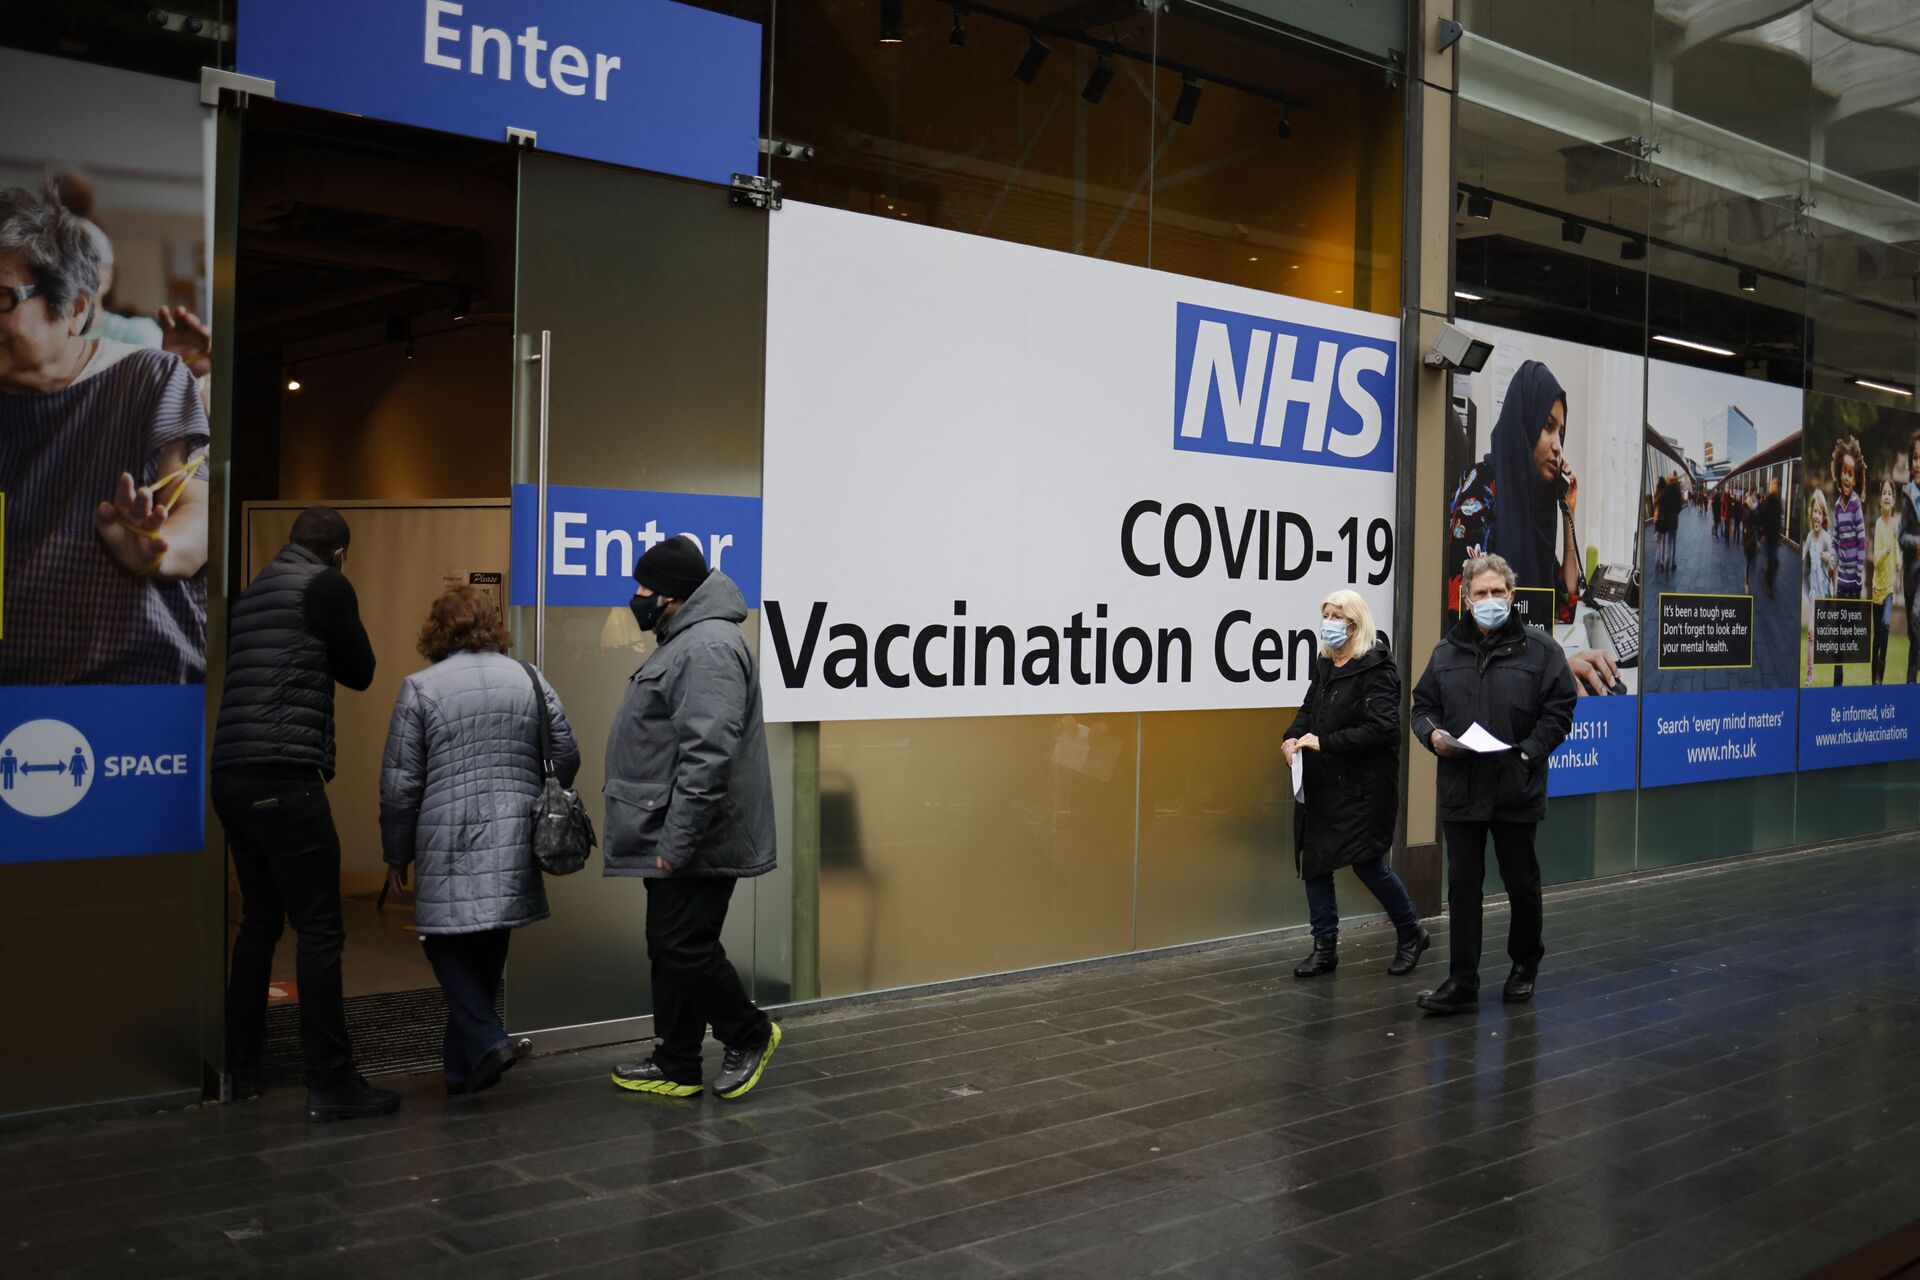 People queue to enter an NHS Covid-19 vaccination centre in Westfield Stratford City shopping centre in east London on February 15, 2021 as Britain's largest ever vaccination programme continues. - Prime Minister Boris Johnson called Britain hitting a target of inoculating 15 million of the most vulnerable people with a first coronavirus jab a significant milestone, as the country prepared for the next phase of its vaccination programme. (Photo by Tolga Akmen / AFP) - Sputnik International, 1920, 08.10.2021